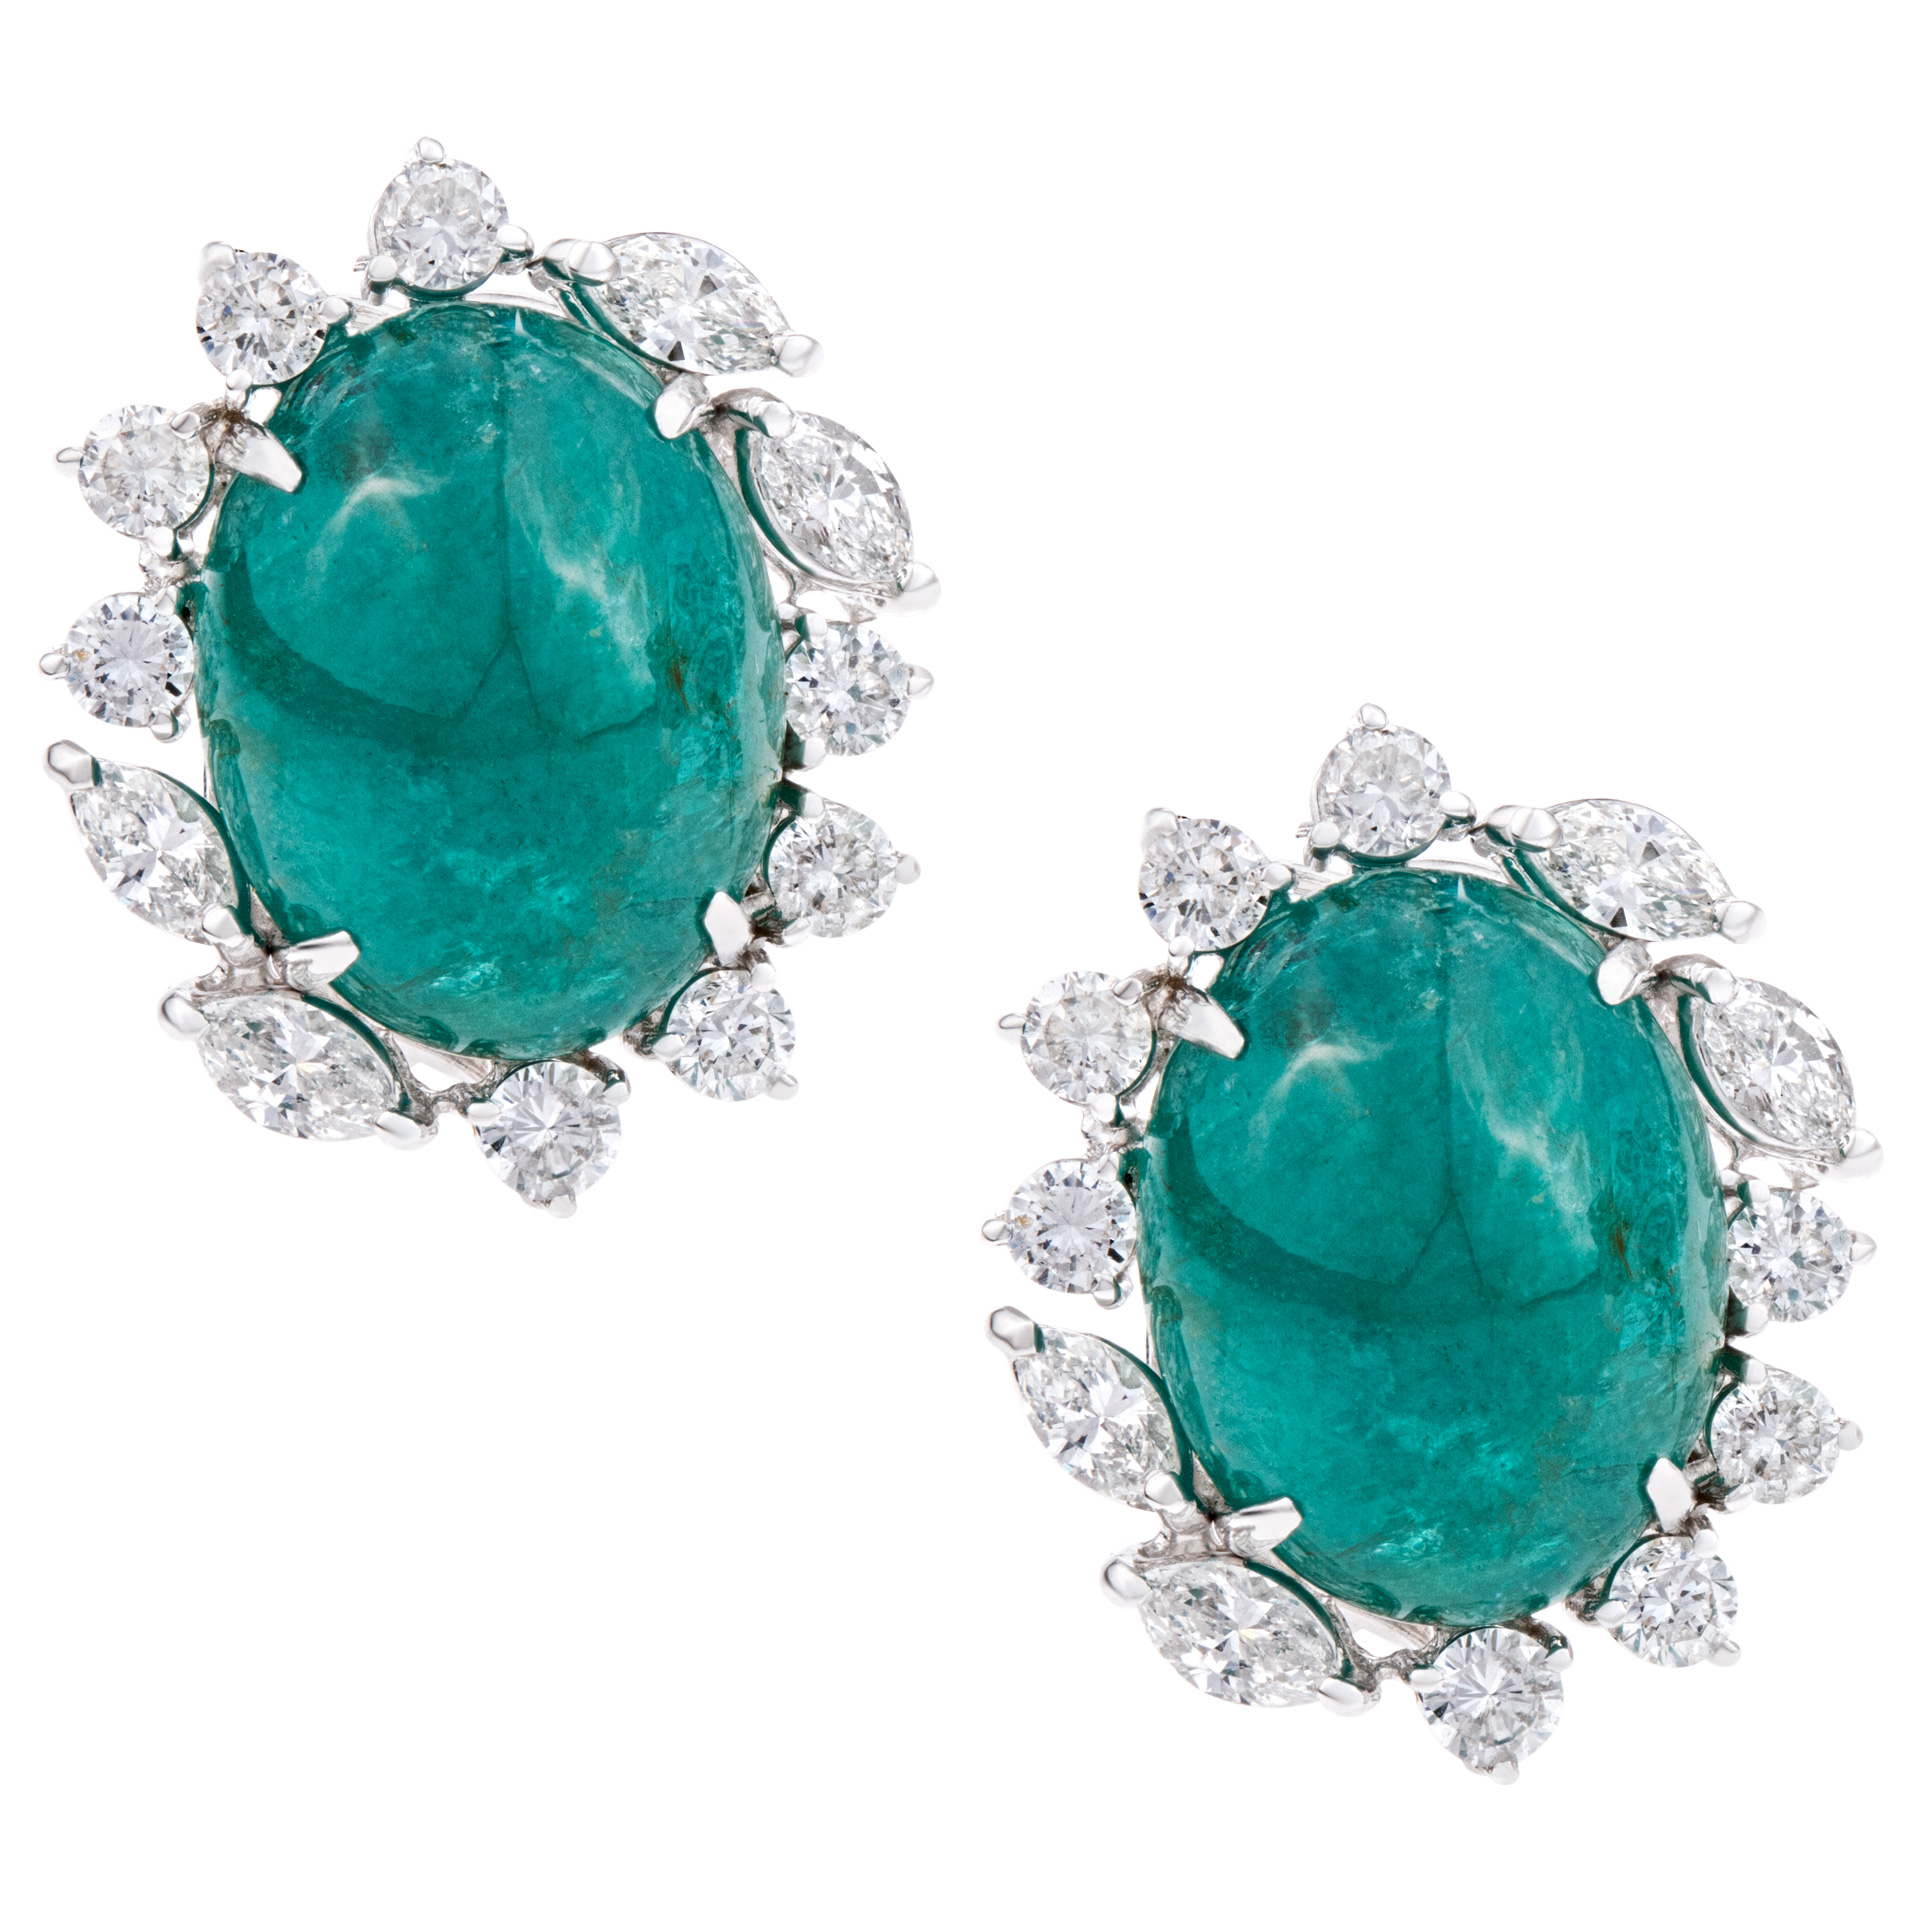 Stunning Emerald and diamond earrings in 18k white gold image 1